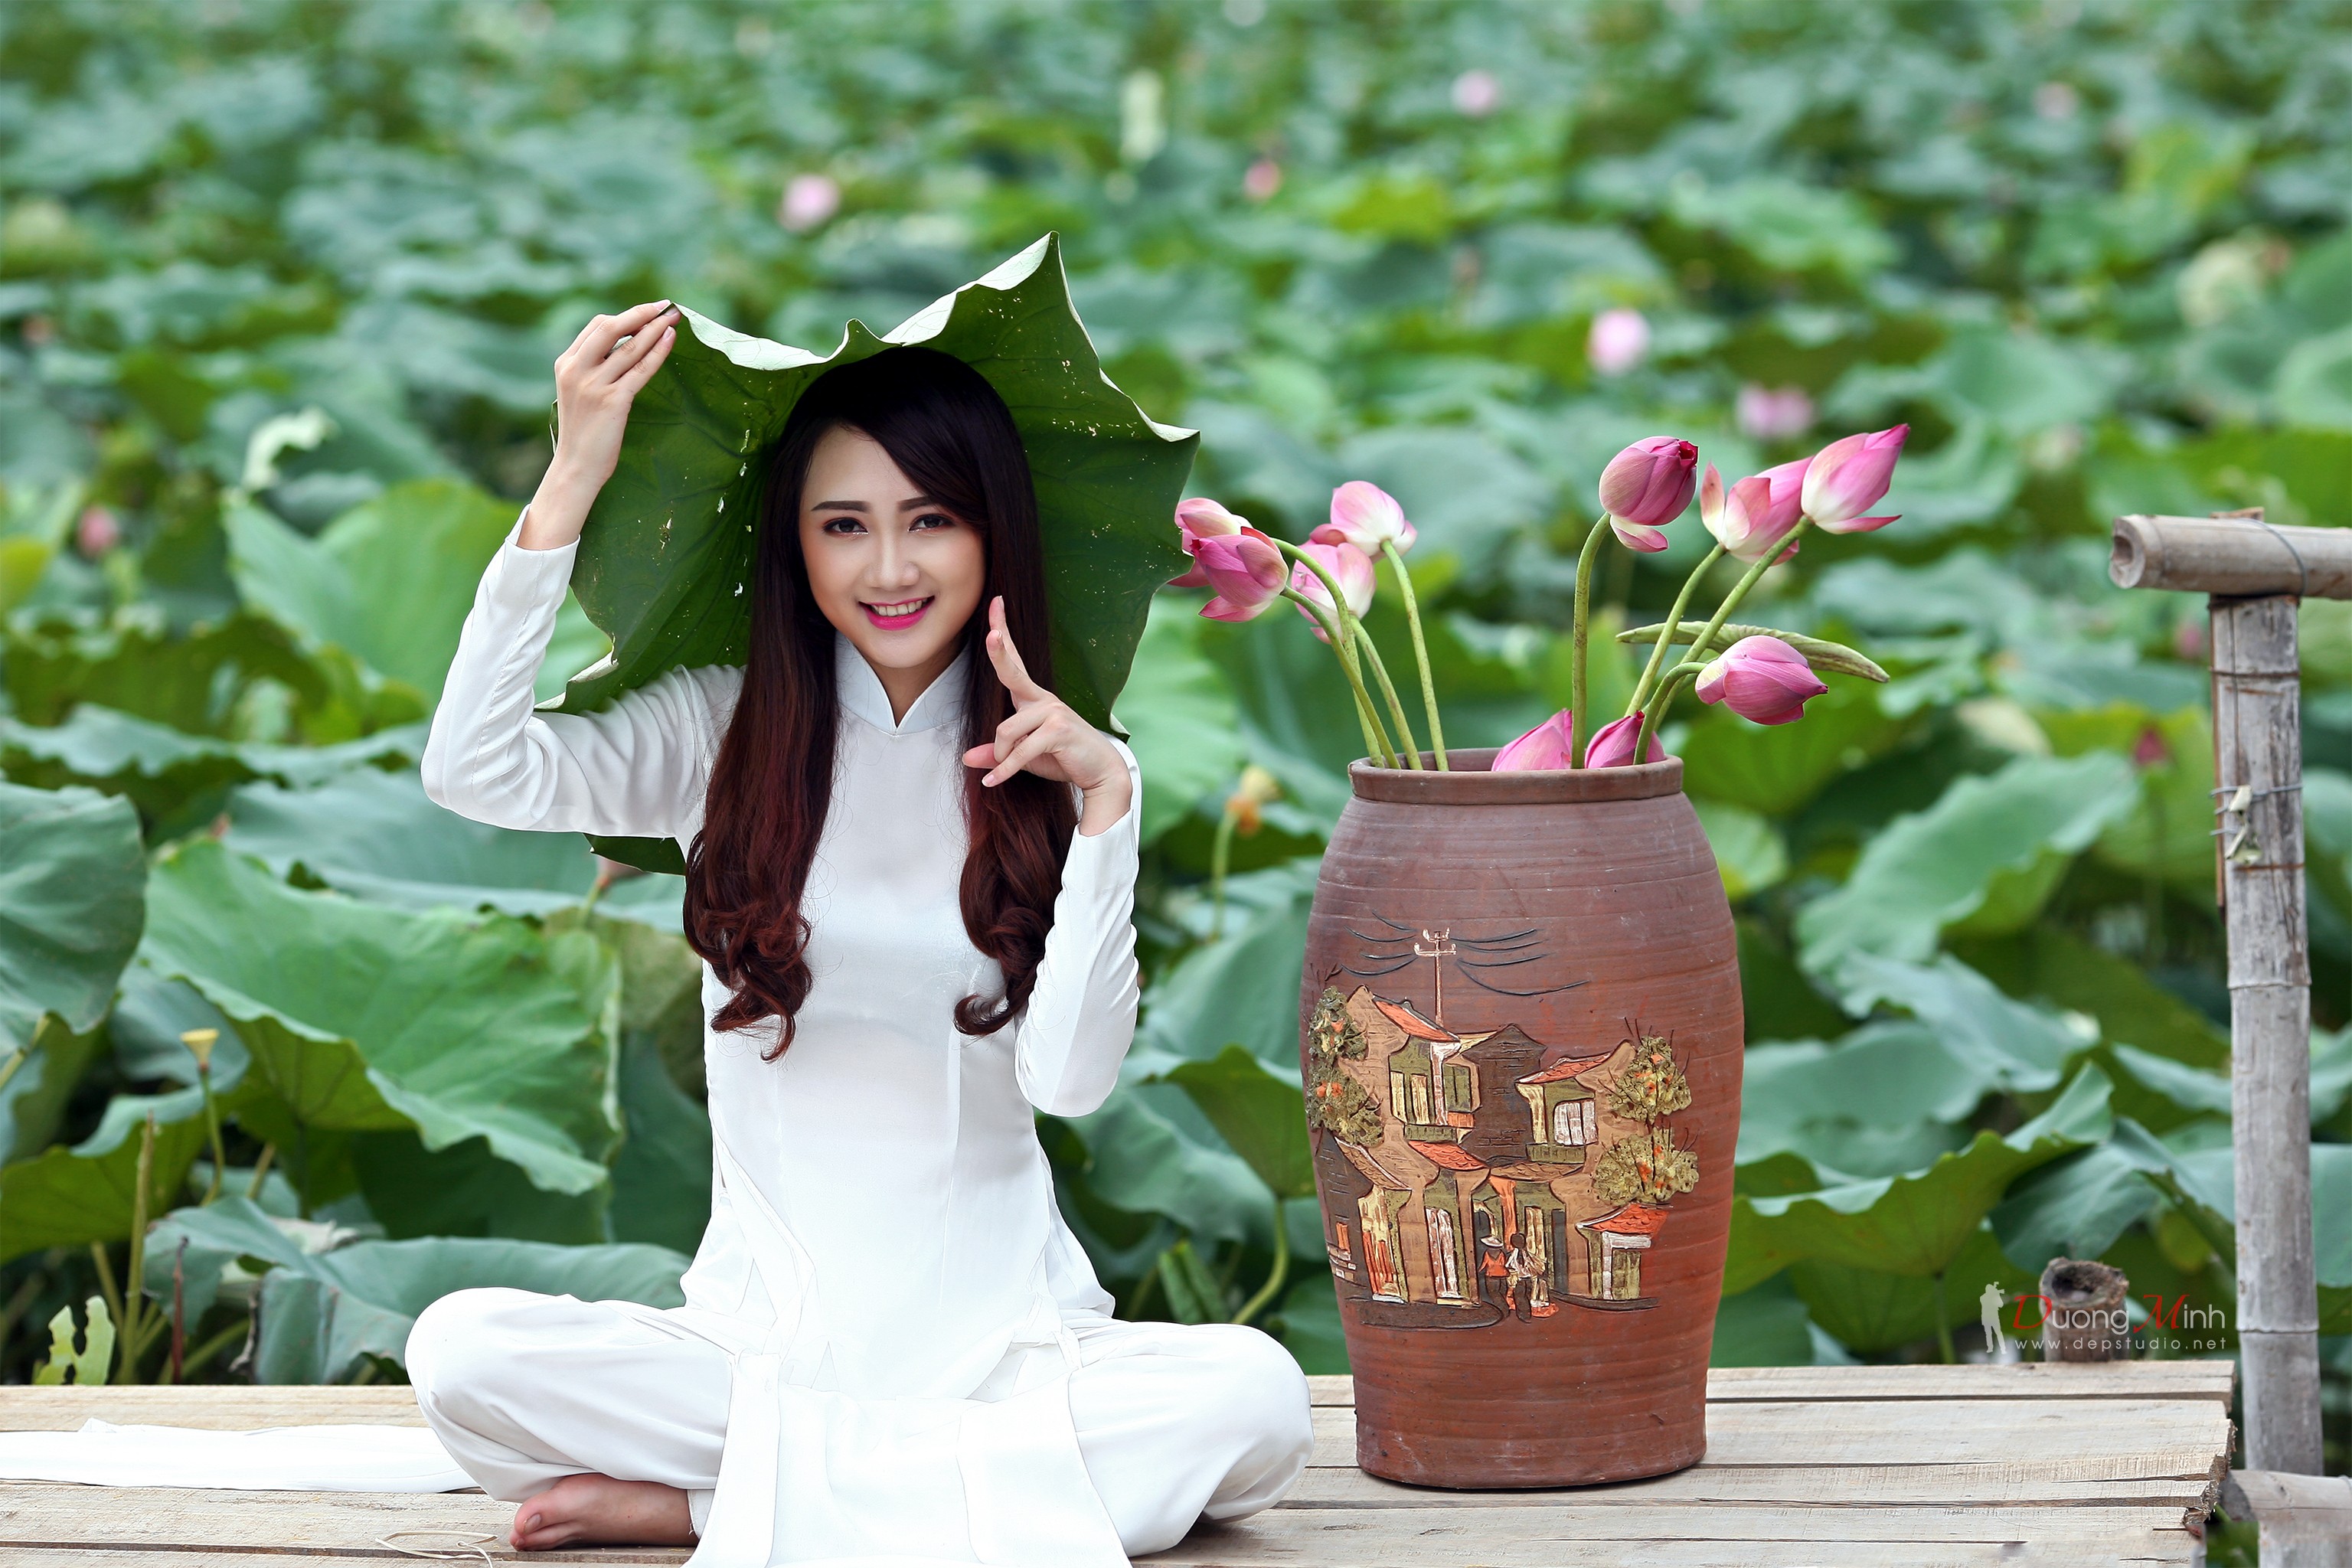 People 3072x2048 women outdoors brunette barefoot women Asian outdoors model plants flowers leaves long hair dyed hair sitting legs crossed looking at viewer watermarked white clothing smiling Asia